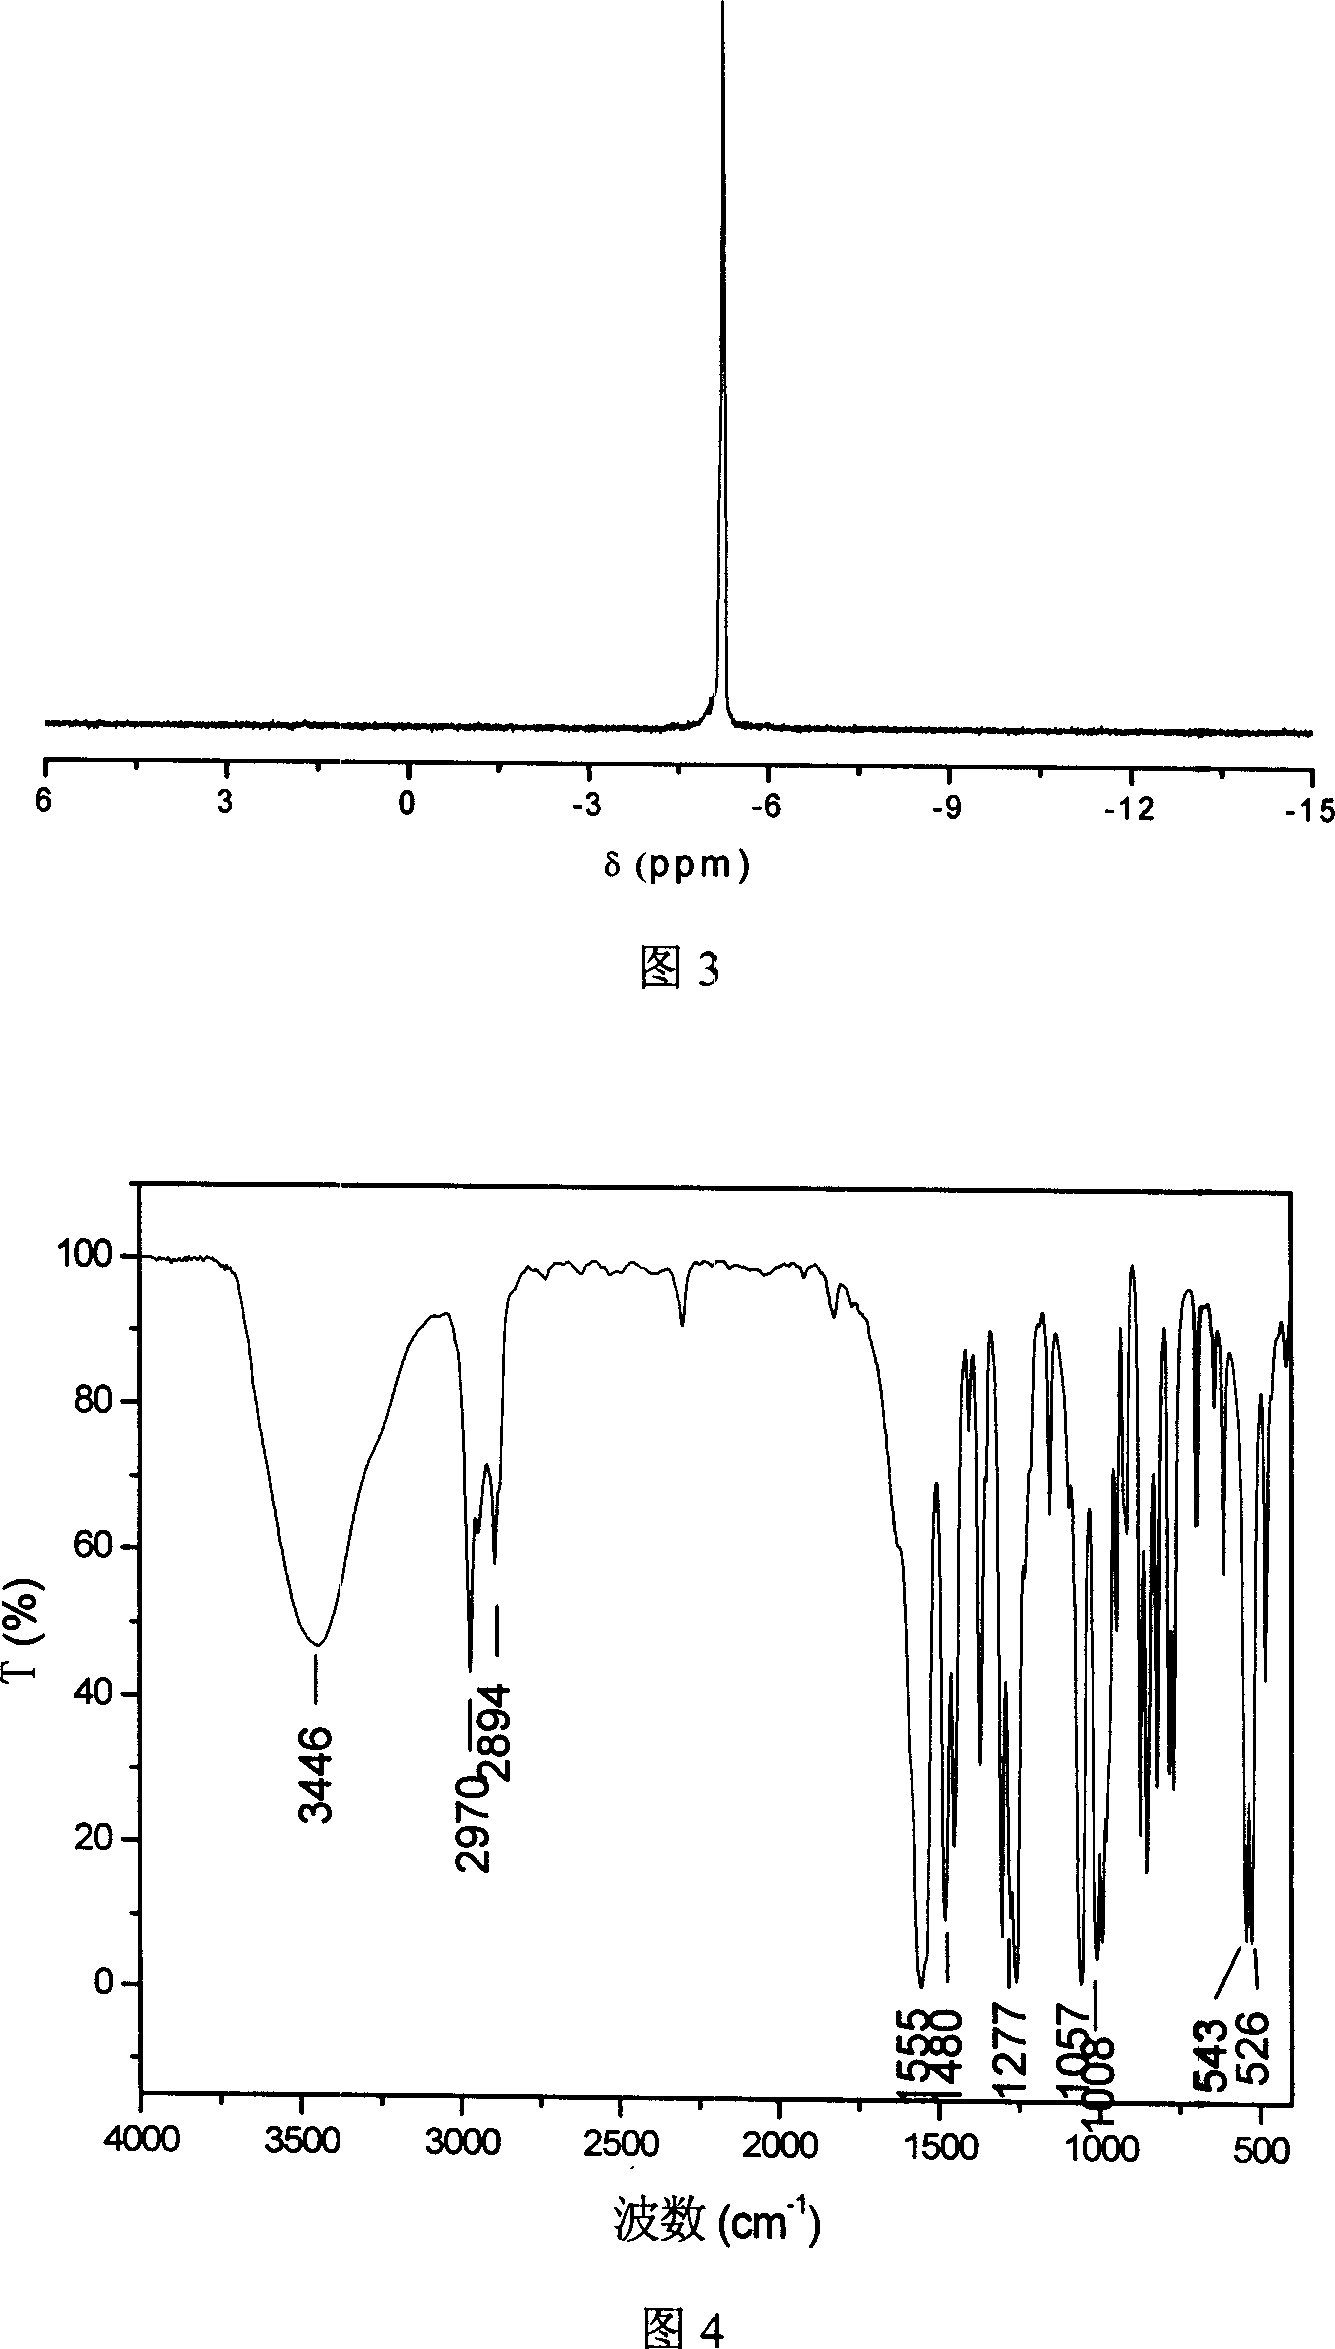 Triazine ring combustion inhibitor containing phosphorus and its preparing process